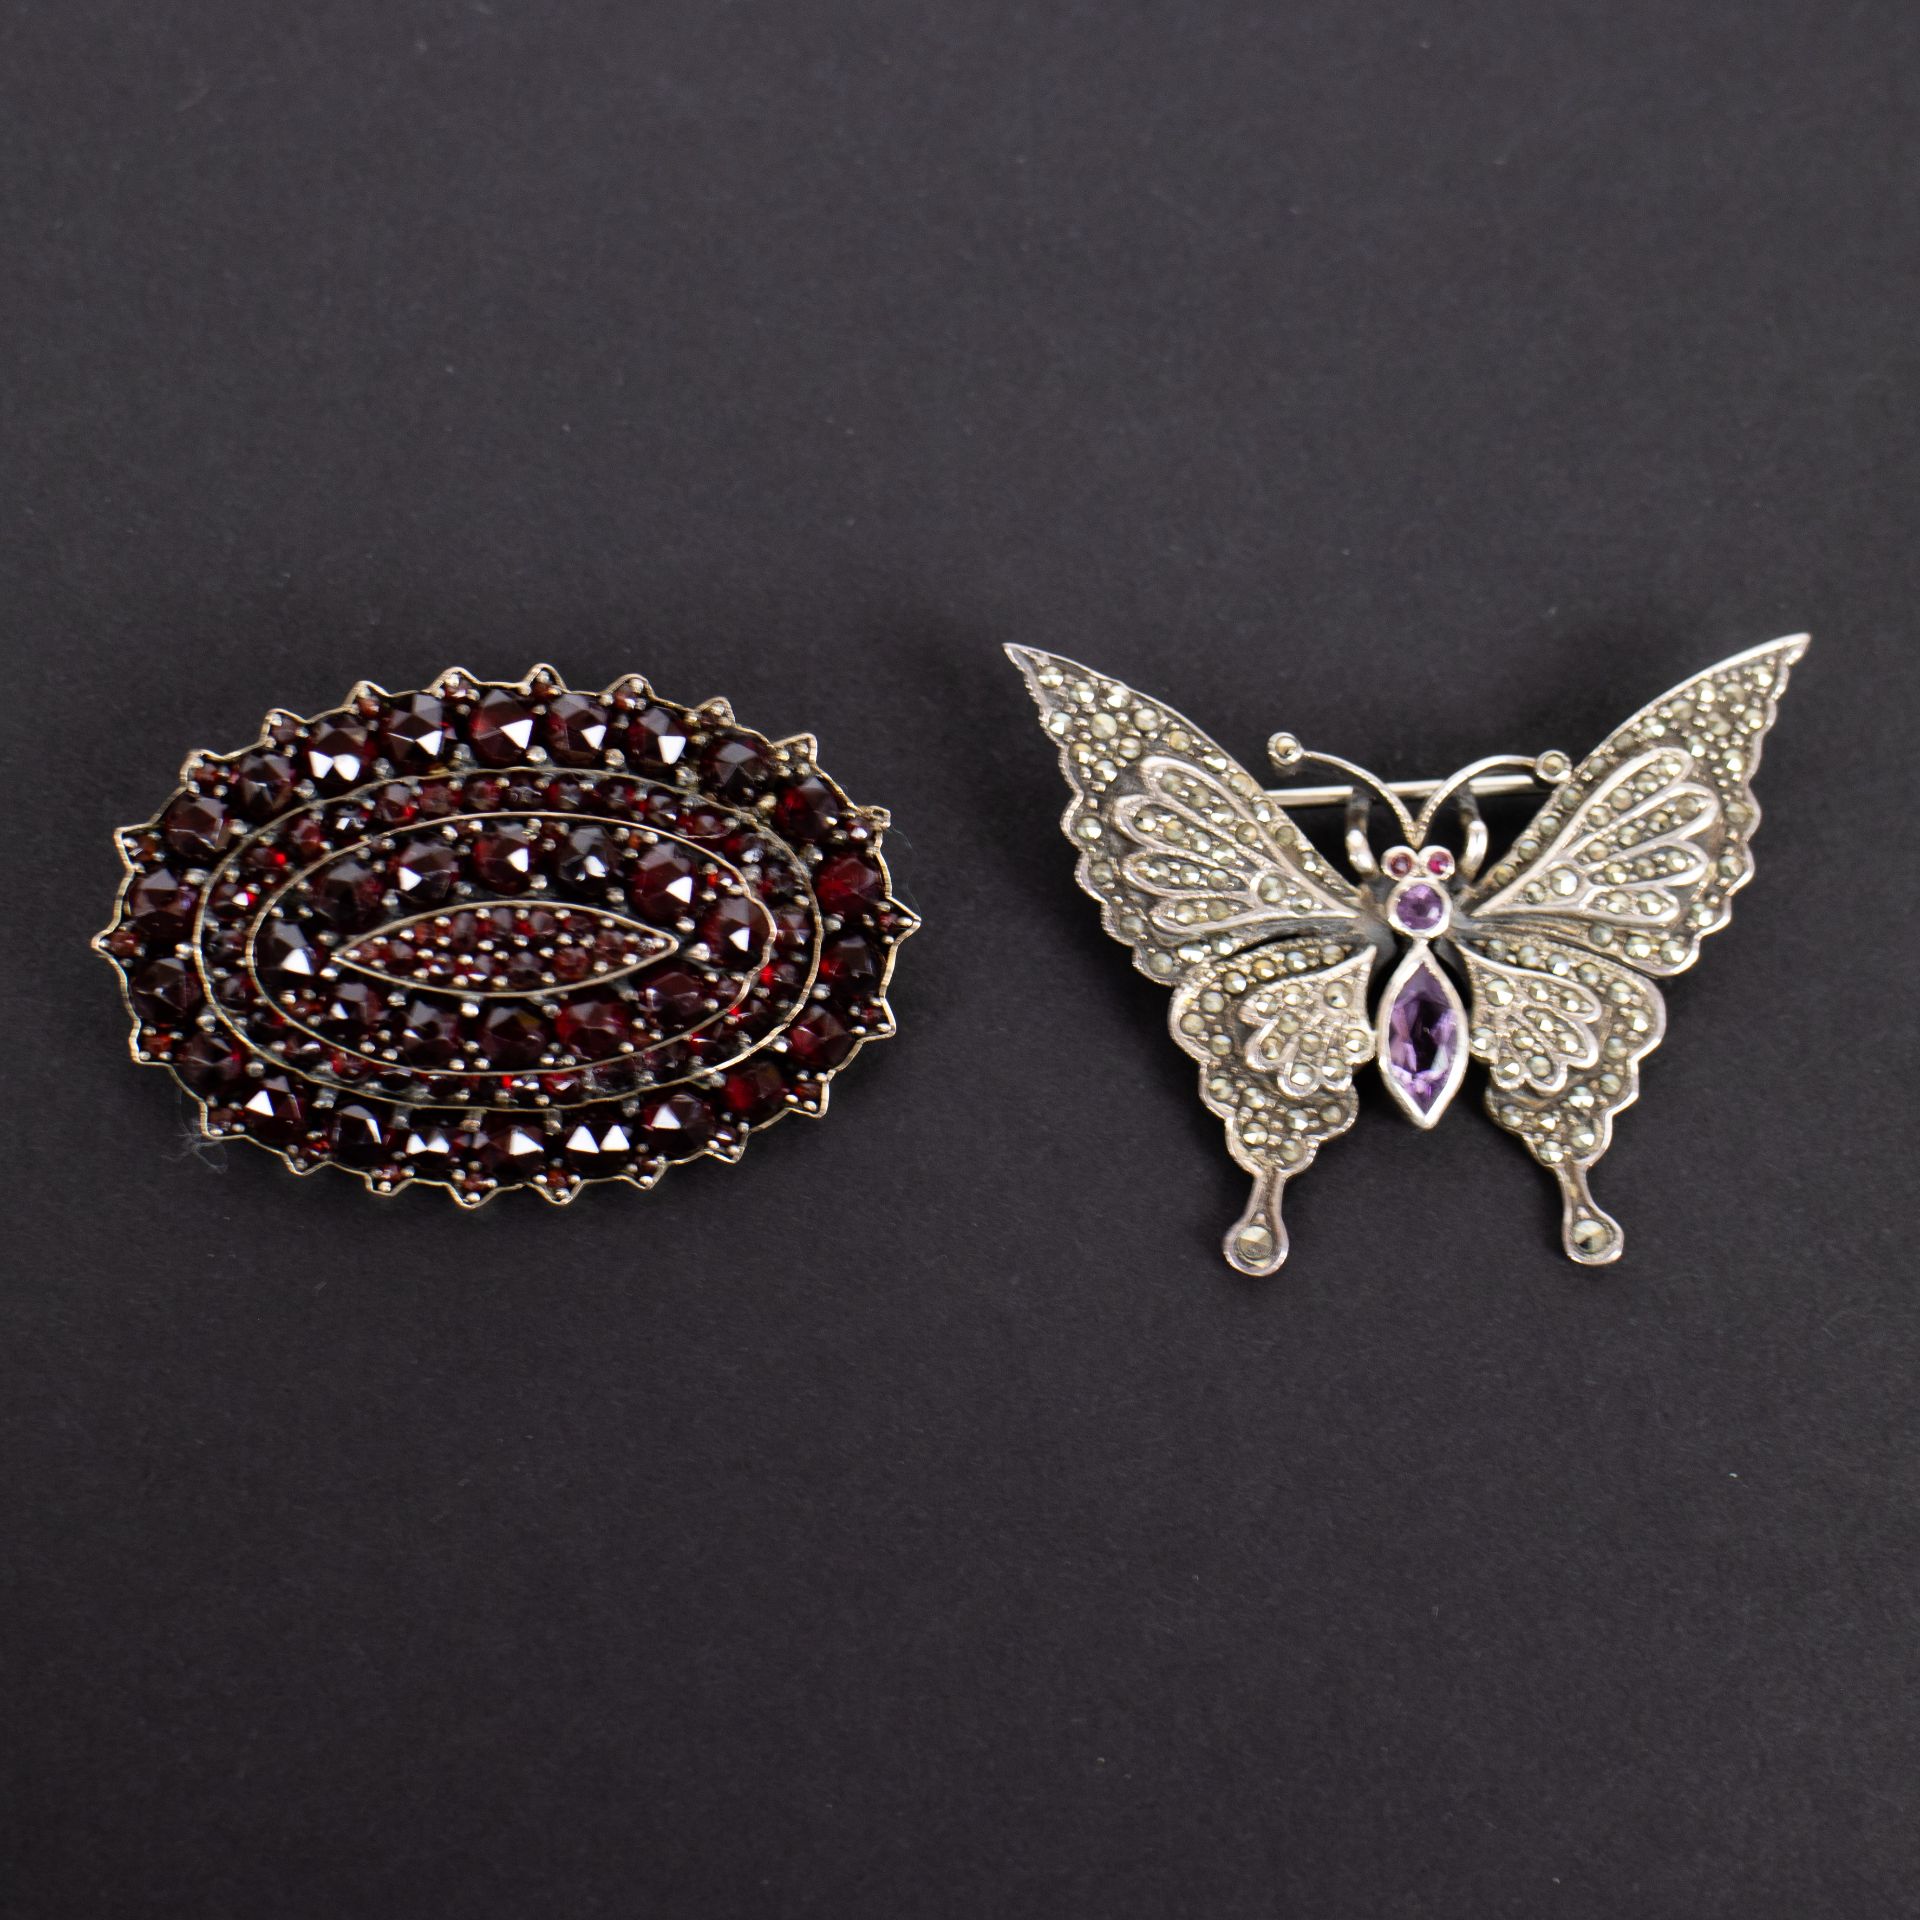 A collection of brooches and earrings - Image 4 of 5